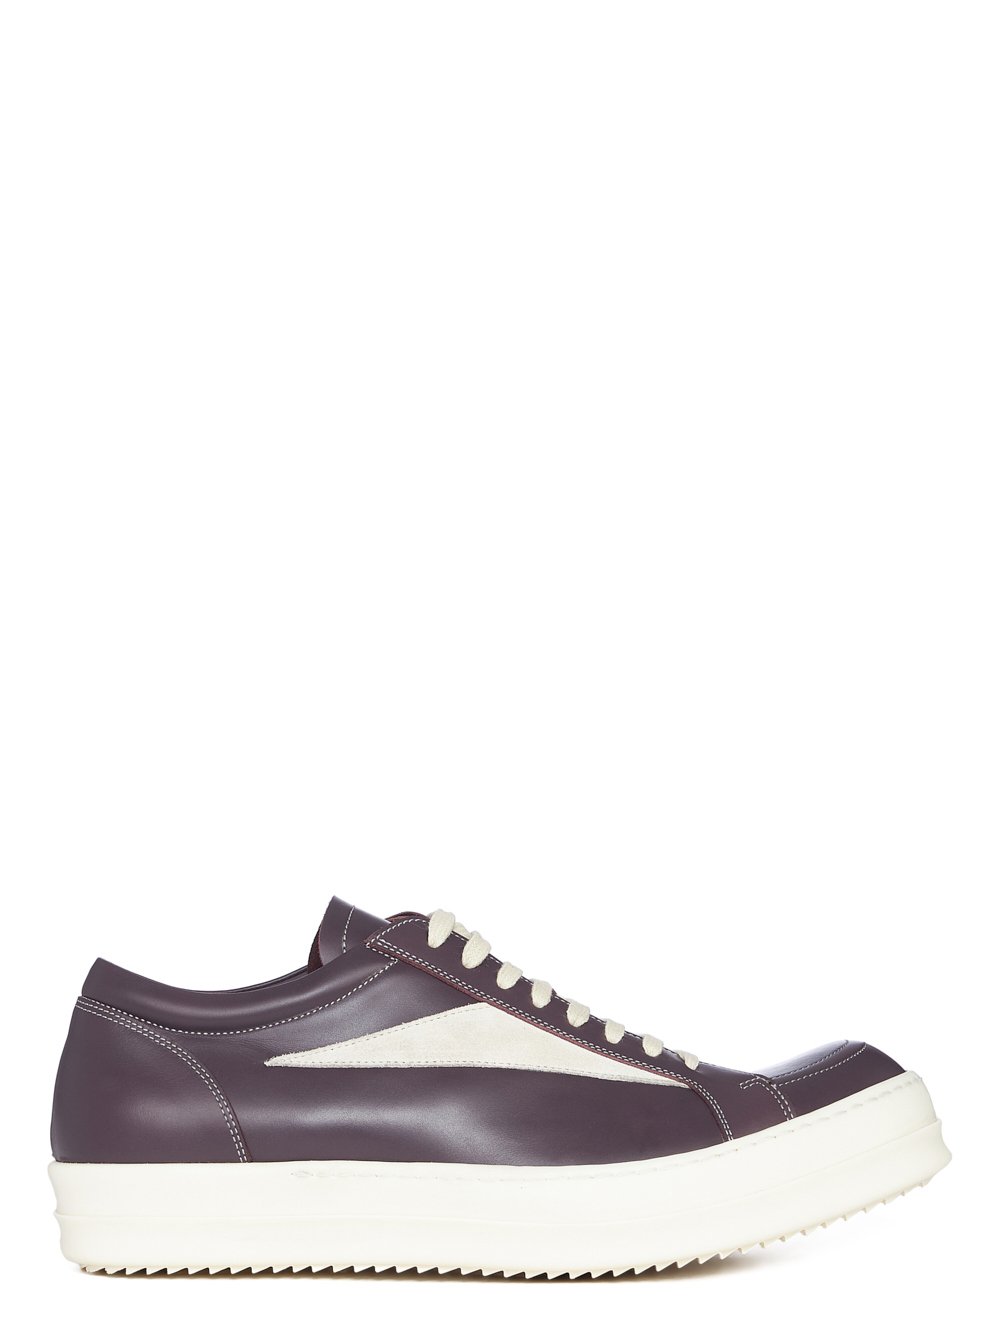 RICK OWENS FW23 LUXOR VINTAGE SNEAKS IN AMETHYST AND MILK CORTINA GREASE CALF LEATHER AND VELOURS SUEDE